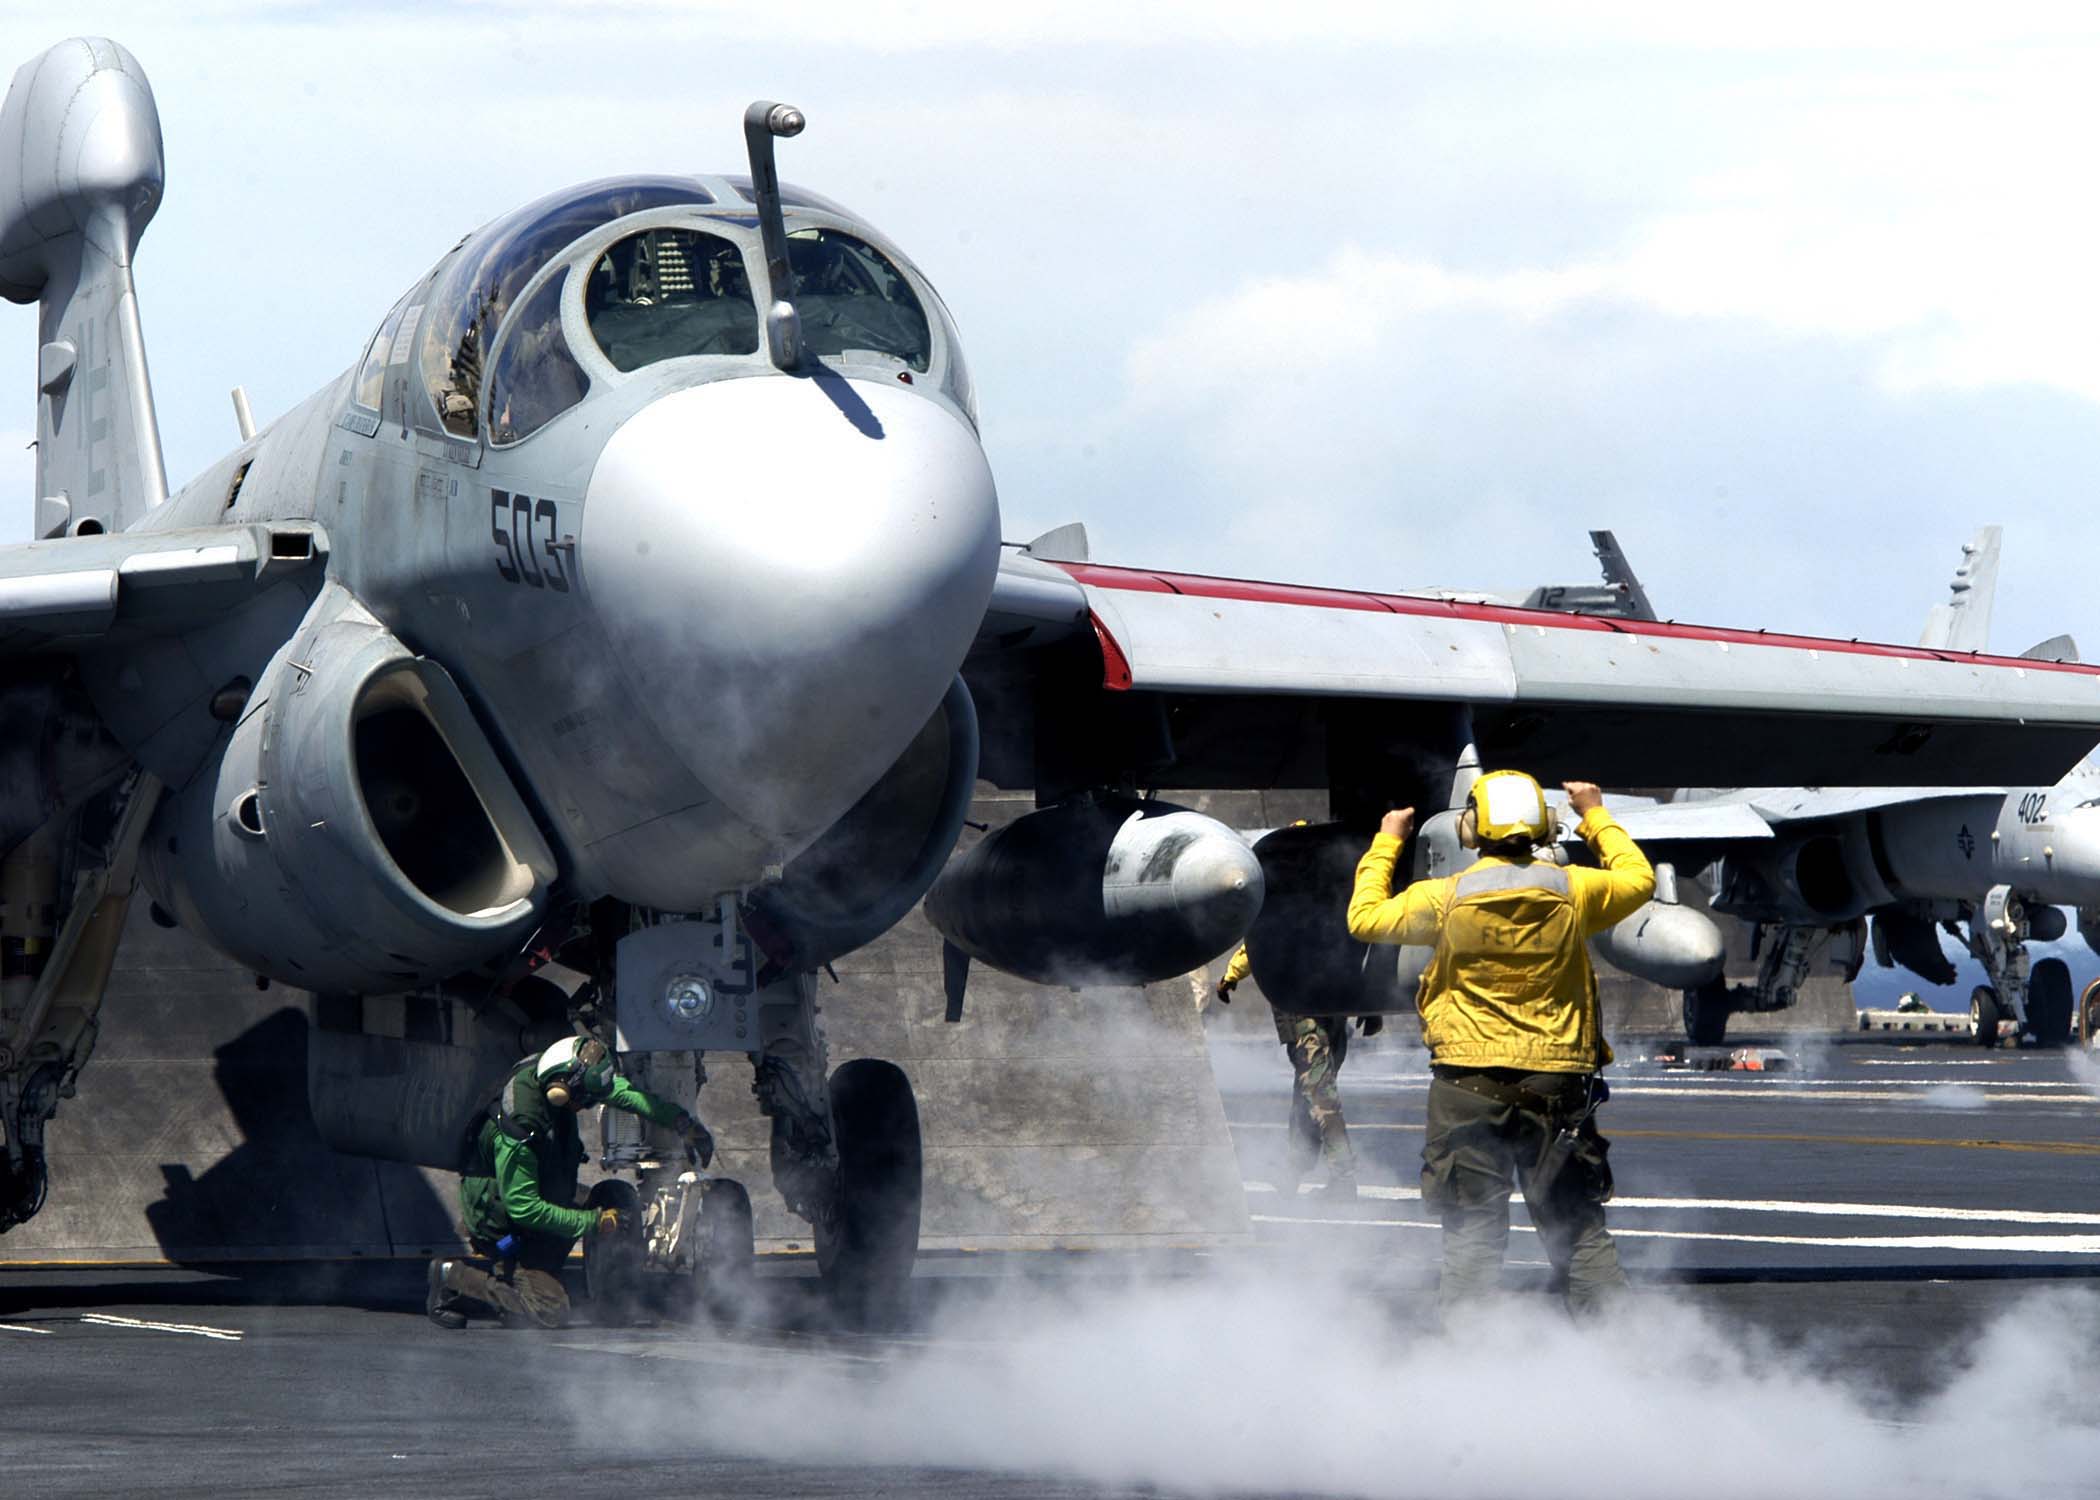 US Navy 041026-N-0499M-096 An Aviation Boatswain's Mate directs an EA-6B Prowler assigned to the Lancers of Electronic Attack Squadron One Three One (VAQ-131) onto a catapult